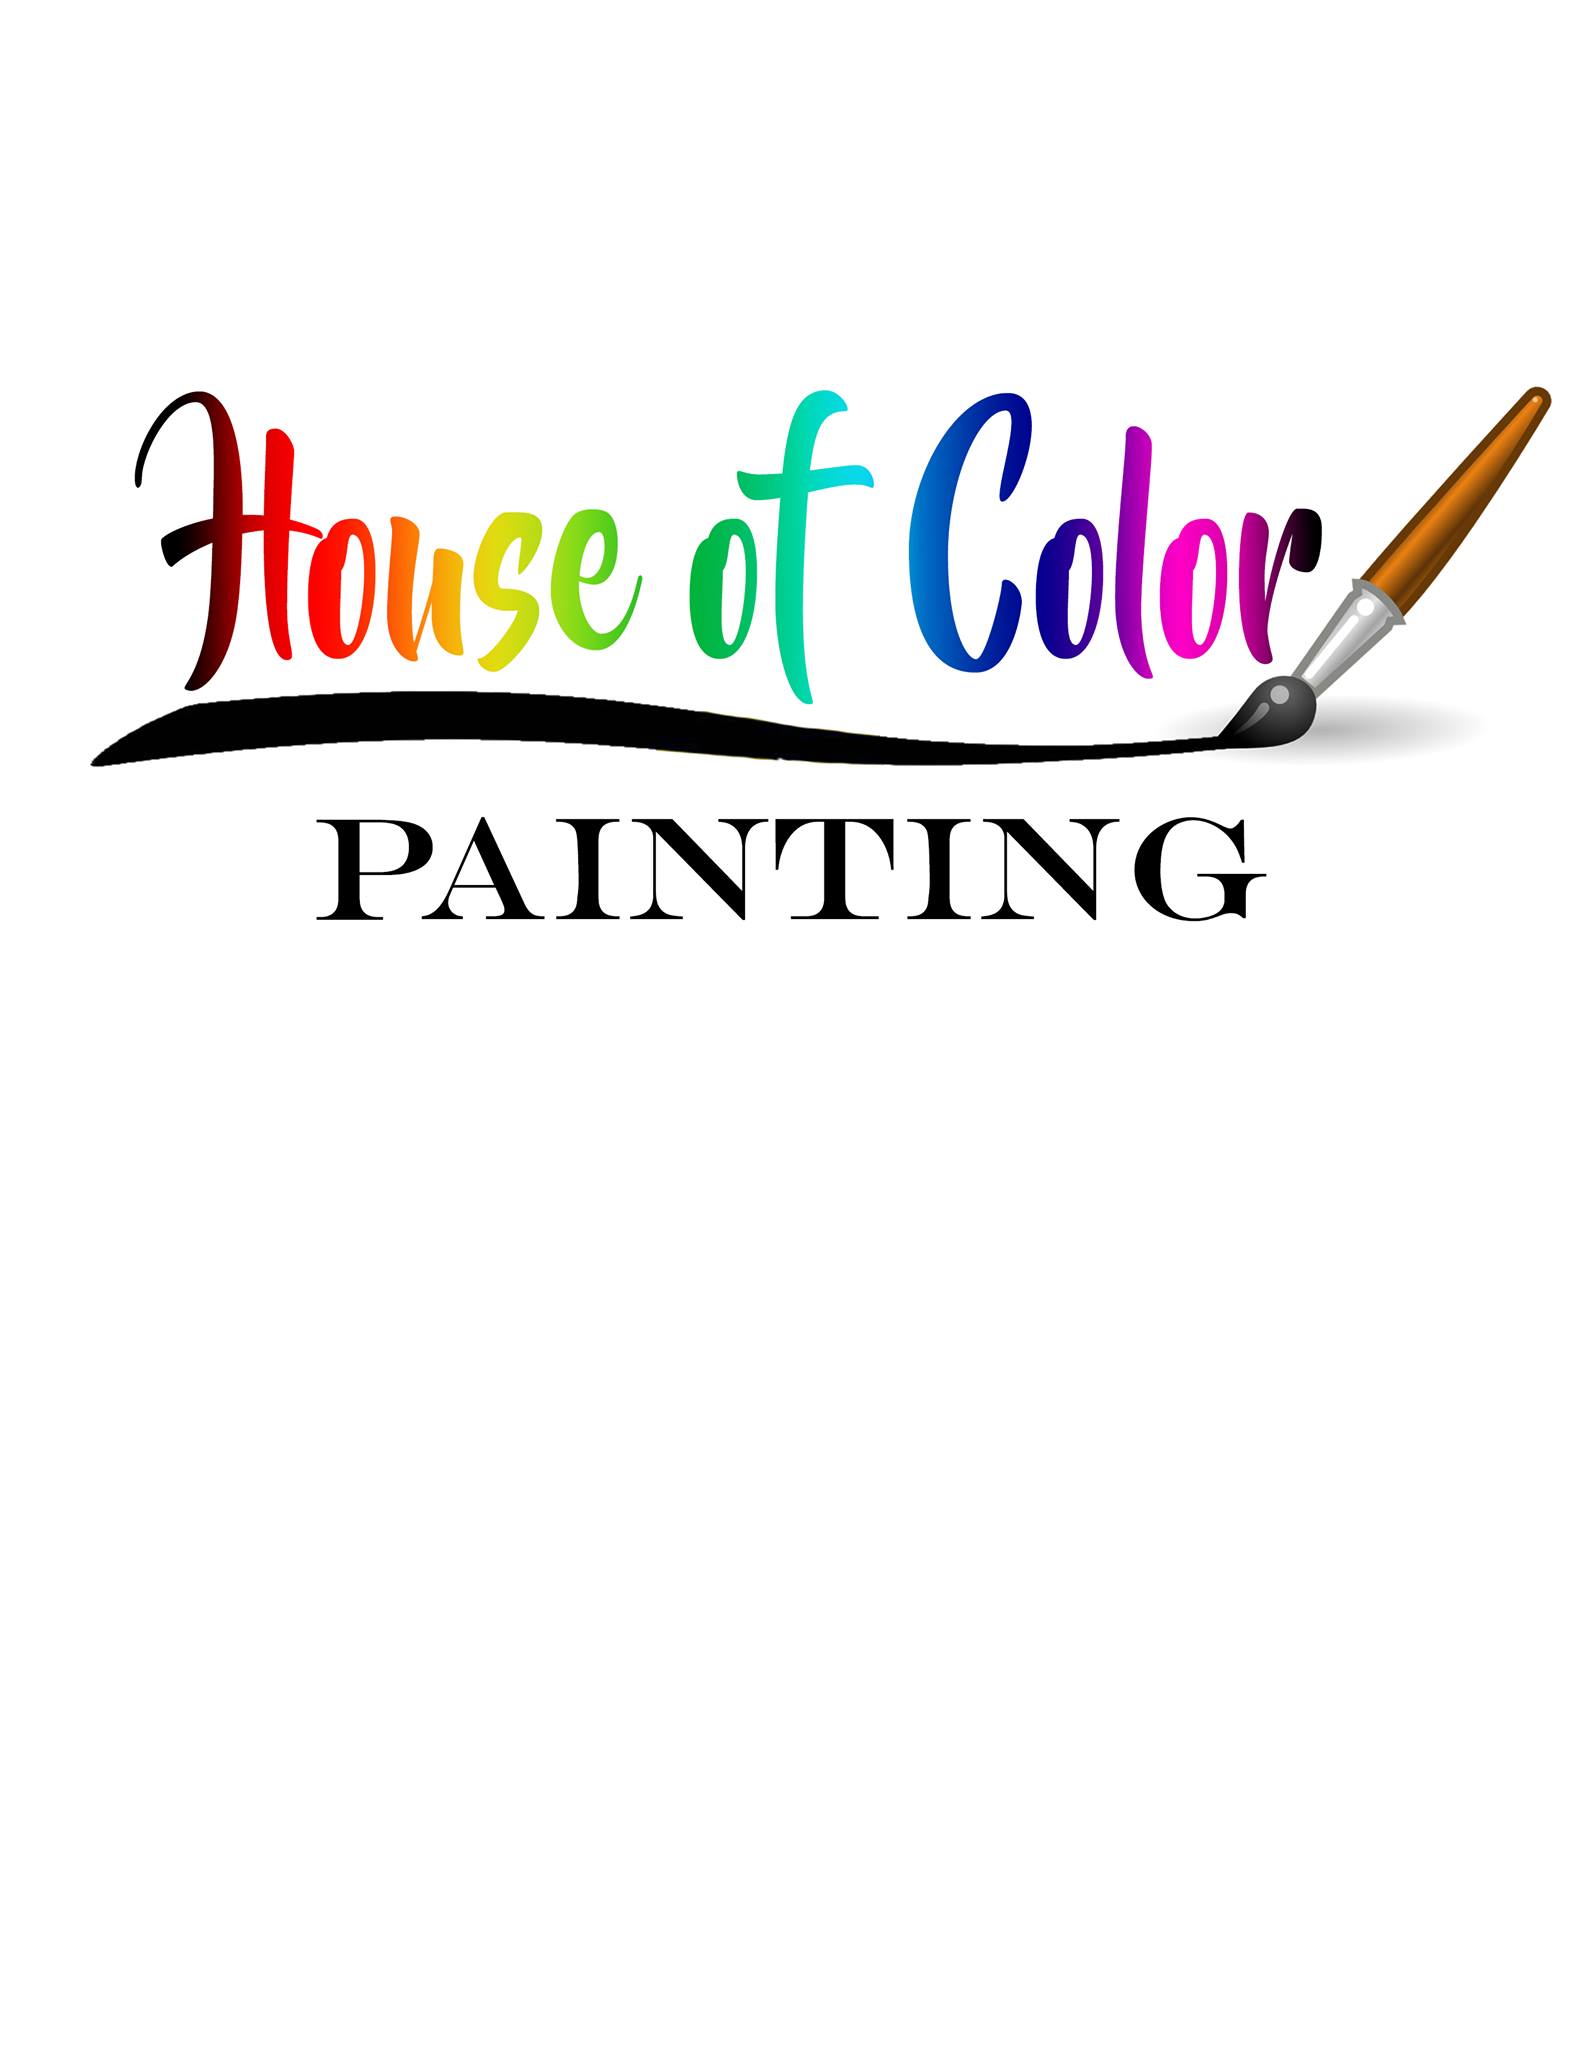 House of Color Painting 356 Demonstranti Rd, Winsted Connecticut 06098